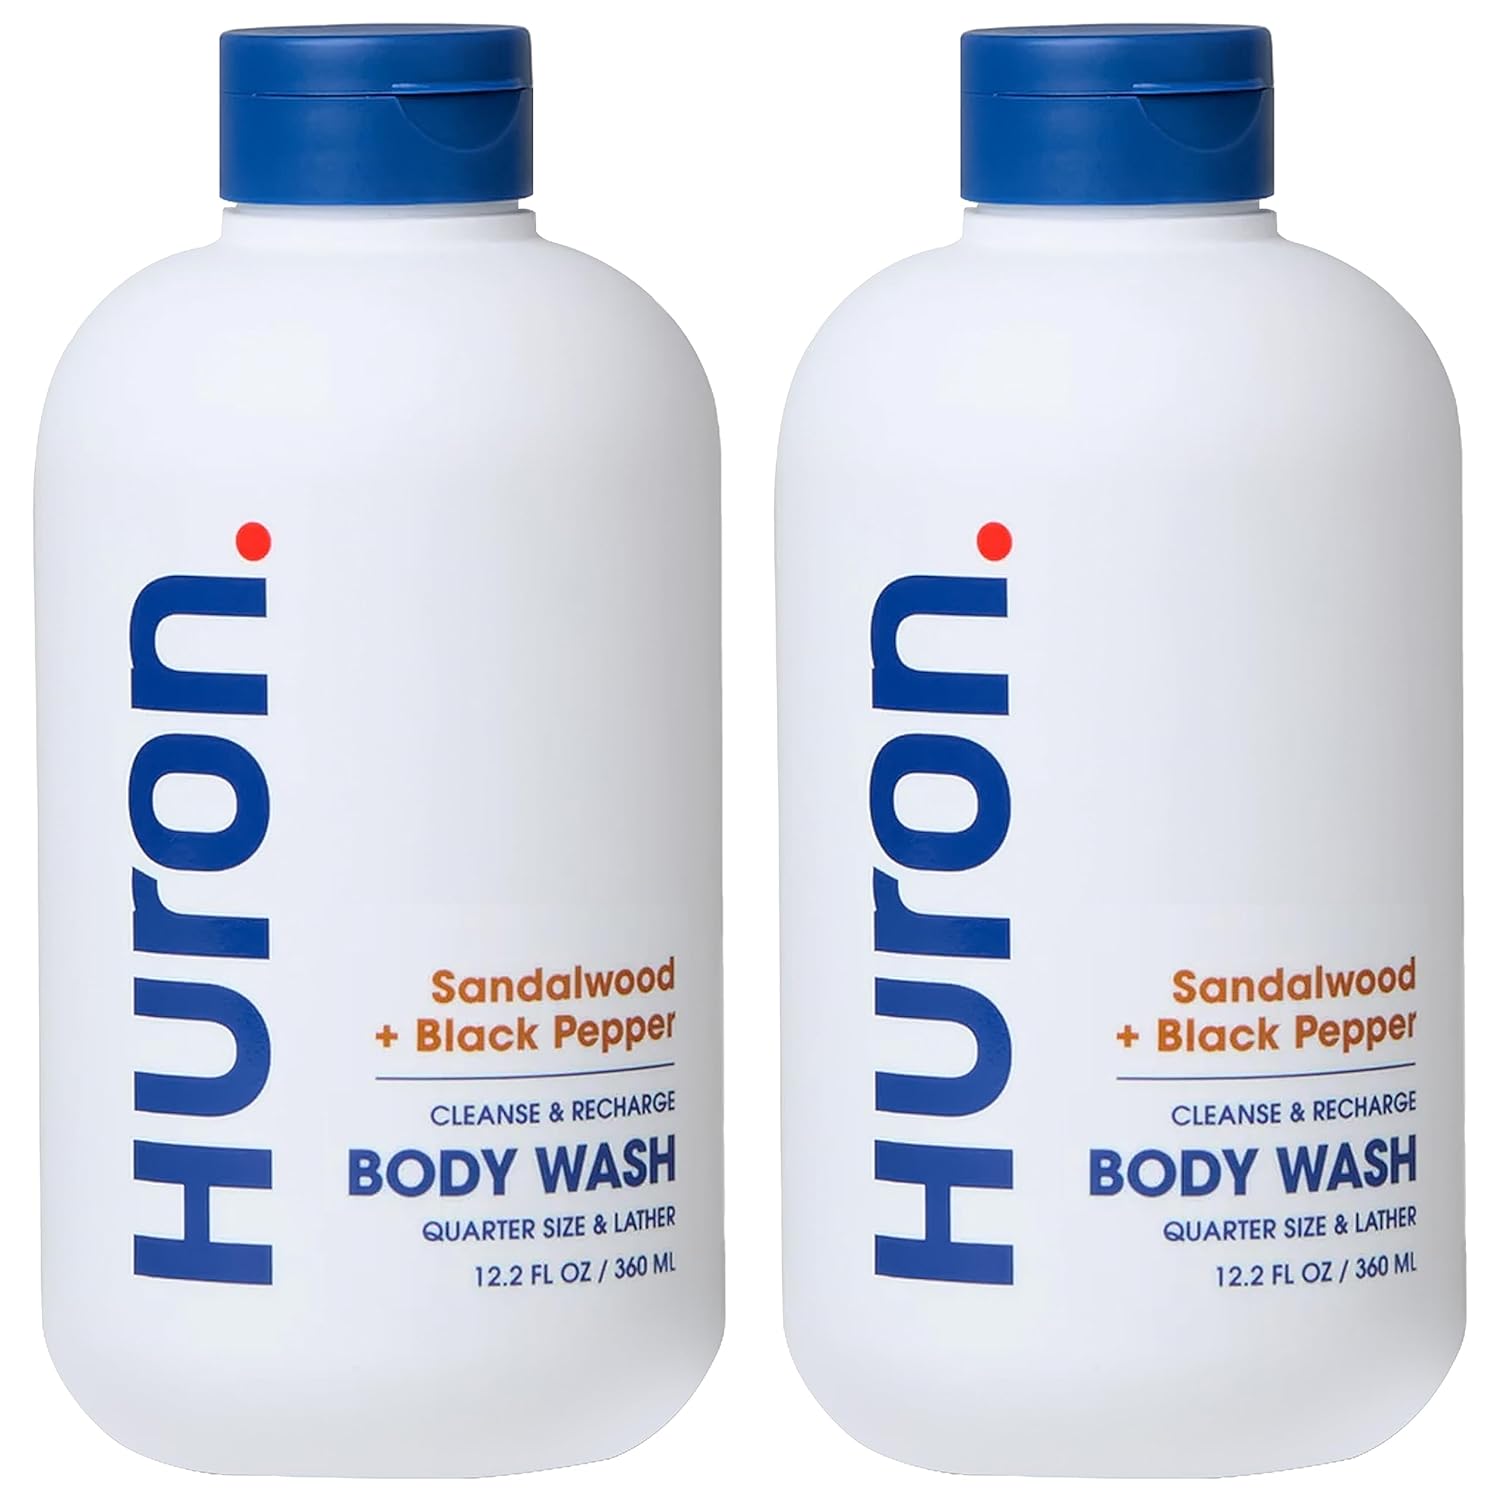 Huron Men’s Moisturizing Body Wash - Clean & Woody Scent of Sandalwood, Black Pepper, Cedarwood, & Amber - Made With Coconut Oil, Vitamin E & Witch Hazel - Vegan, Cruelty-Free - 12.2   (2 Pack)